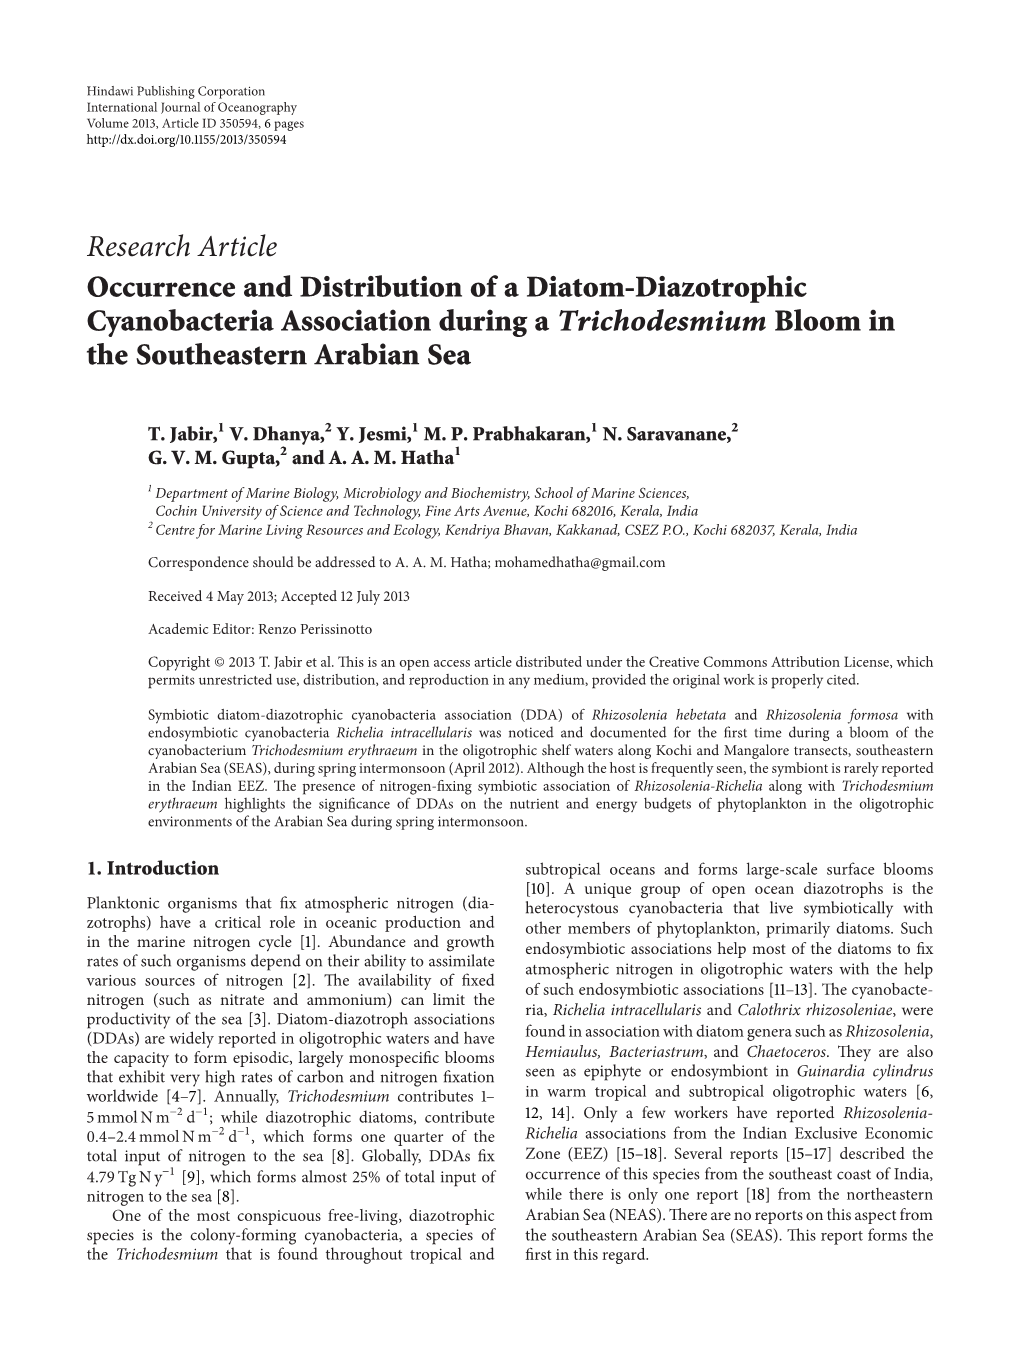 Research Article Occurrence and Distribution of a Diatom-Diazotrophic Cyanobacteria Association During a Trichodesmium Bloom in the Southeastern Arabian Sea